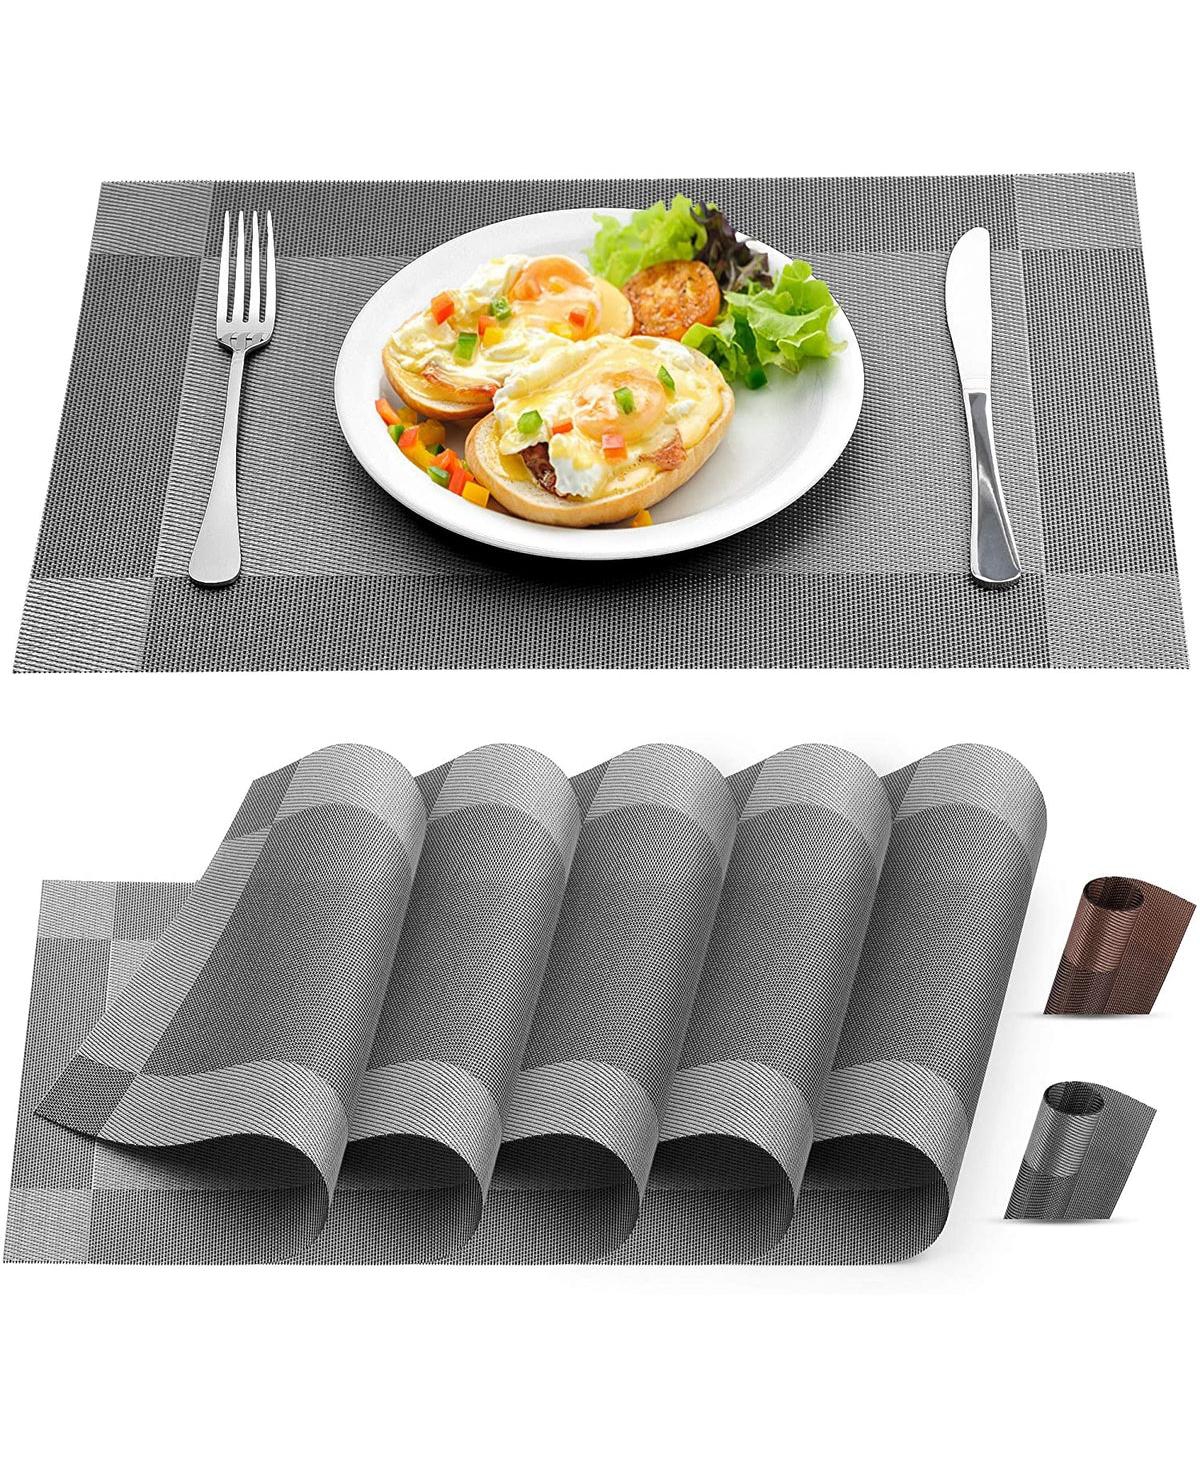 Vinyl Woven Placemats for Dining Table Set of 6 - Brown